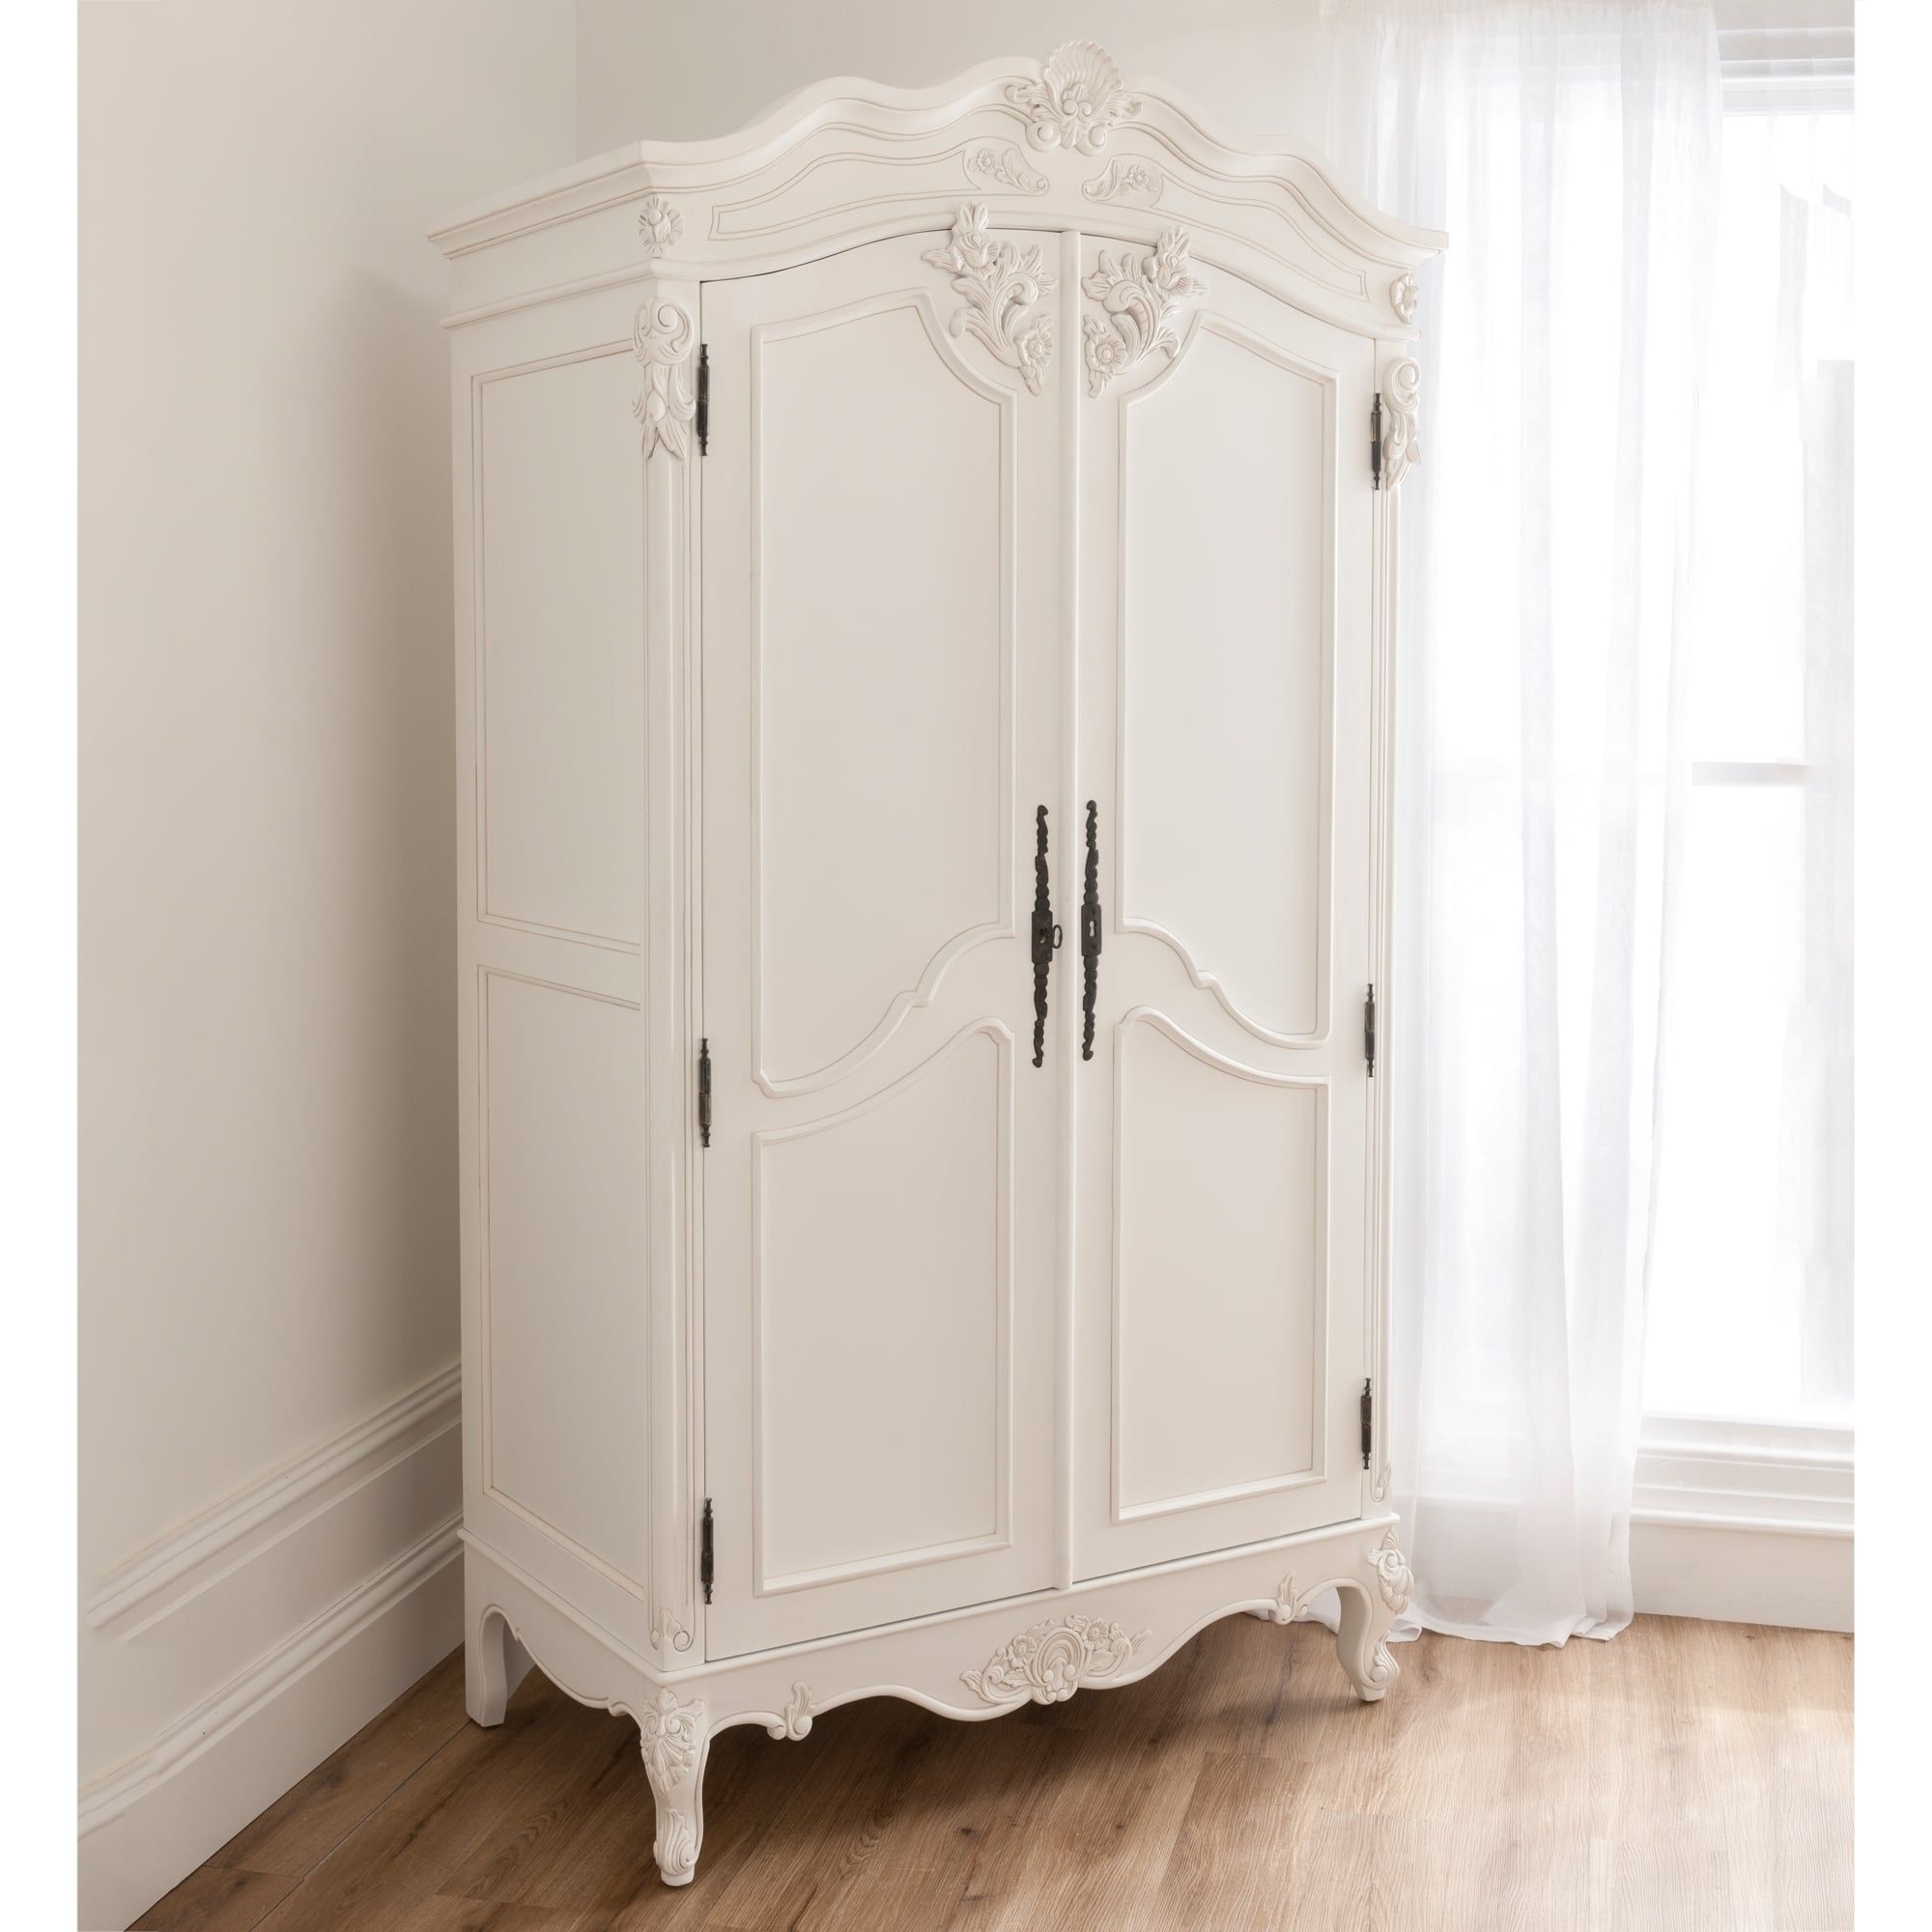 White French Style Wardrobes Cream Children's In Many Type And Within 2017 Cream French Wardrobes (View 10 of 15)